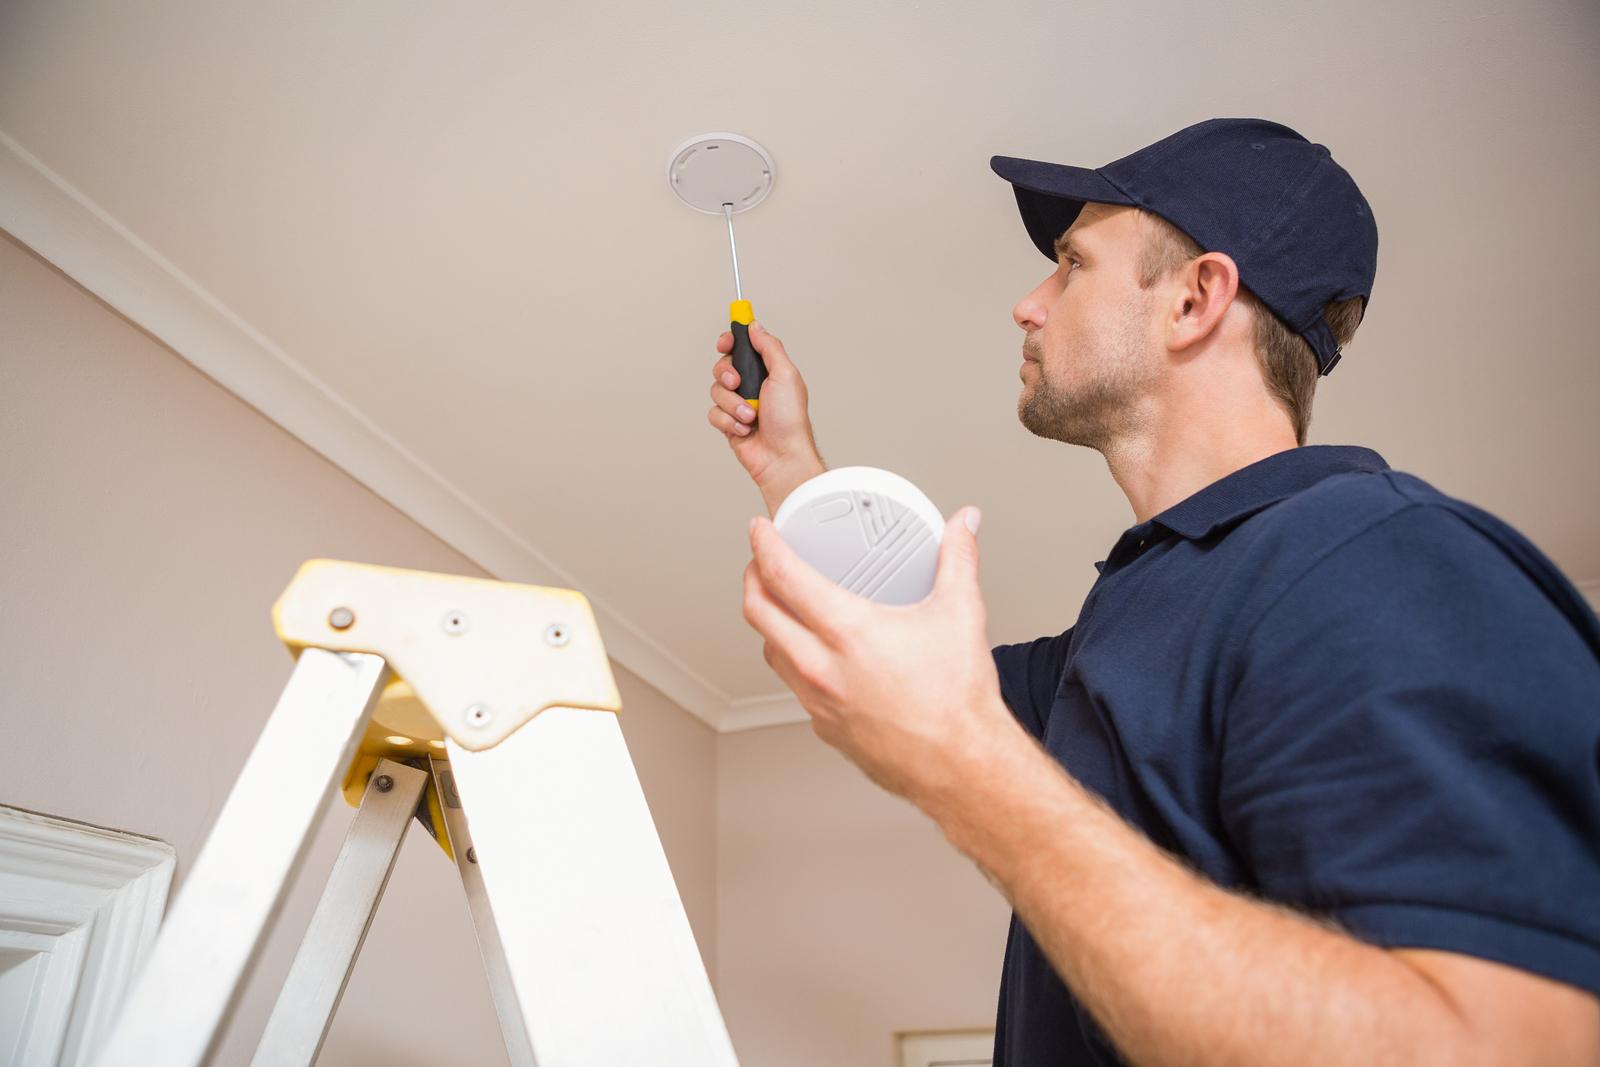 How To Install A Carbon Monoxide Detector According To California Law